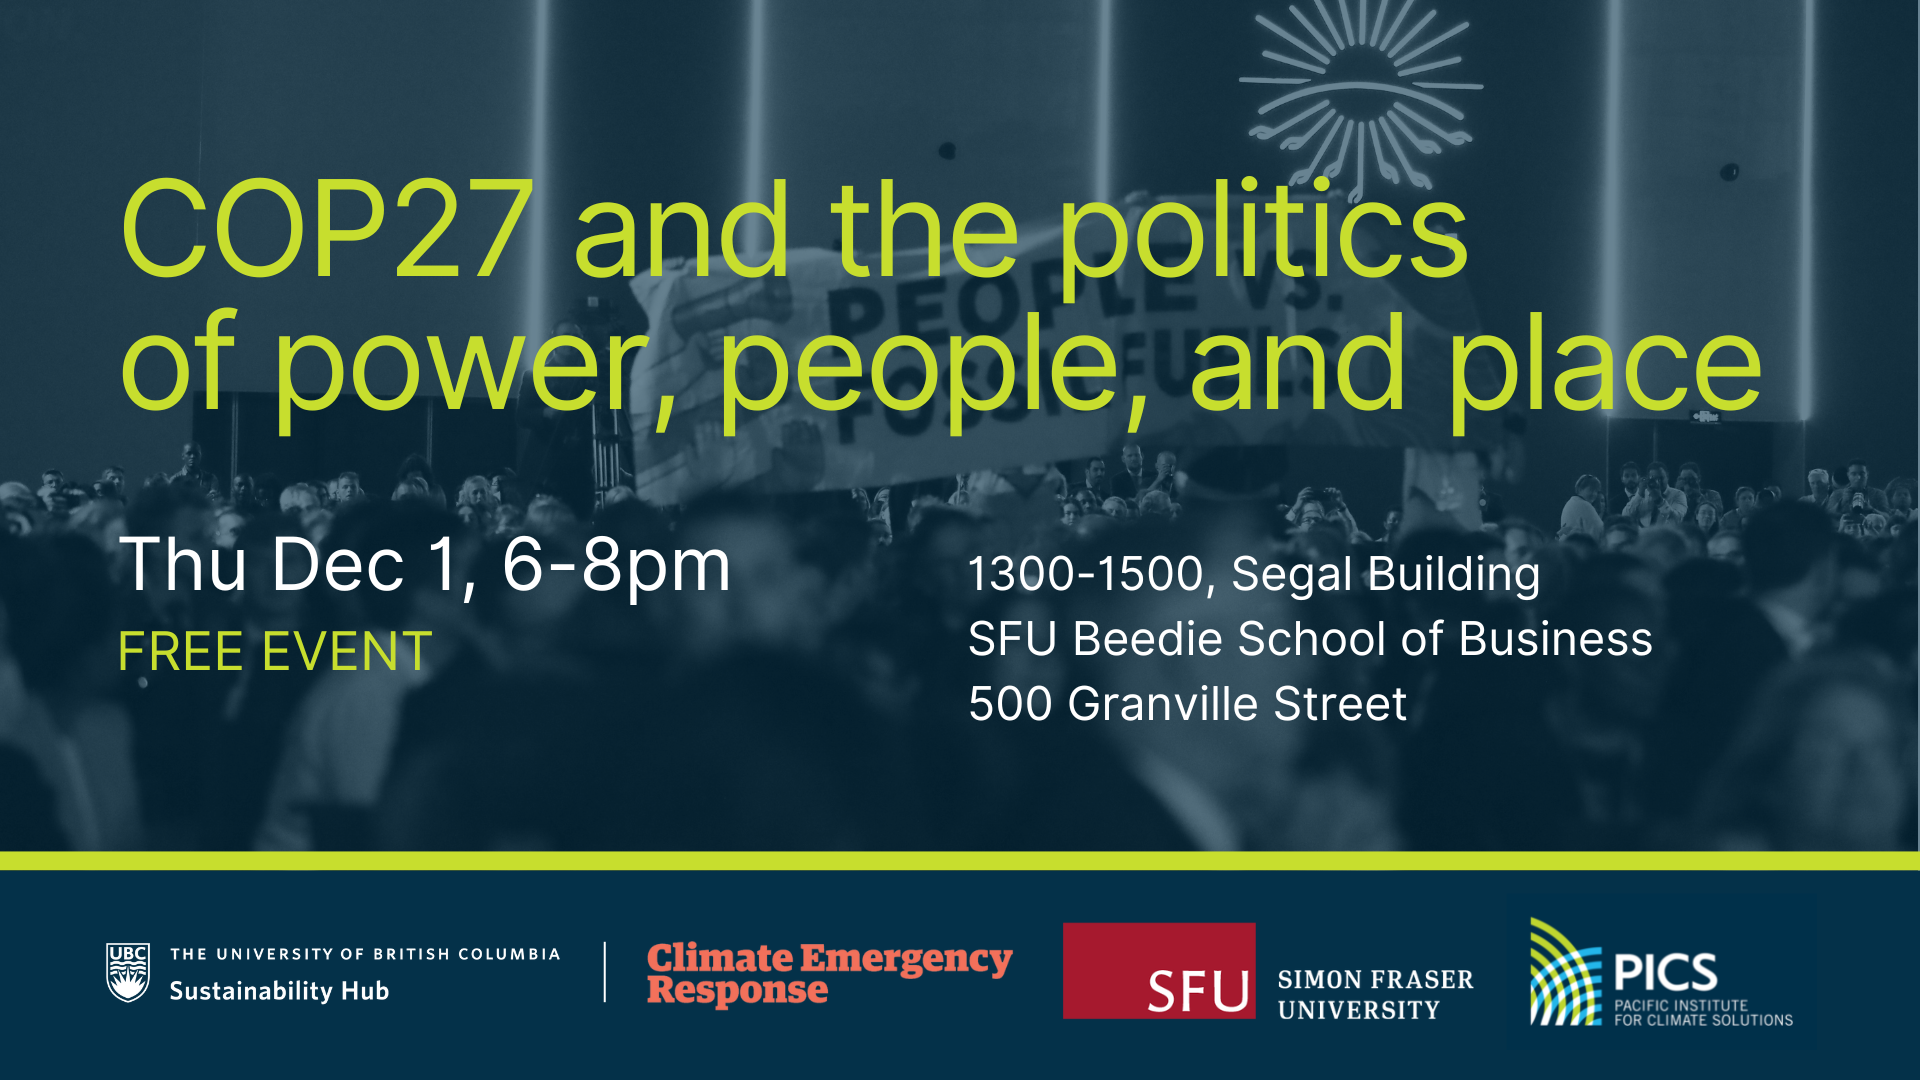 COP27 and the politics of power, people and place